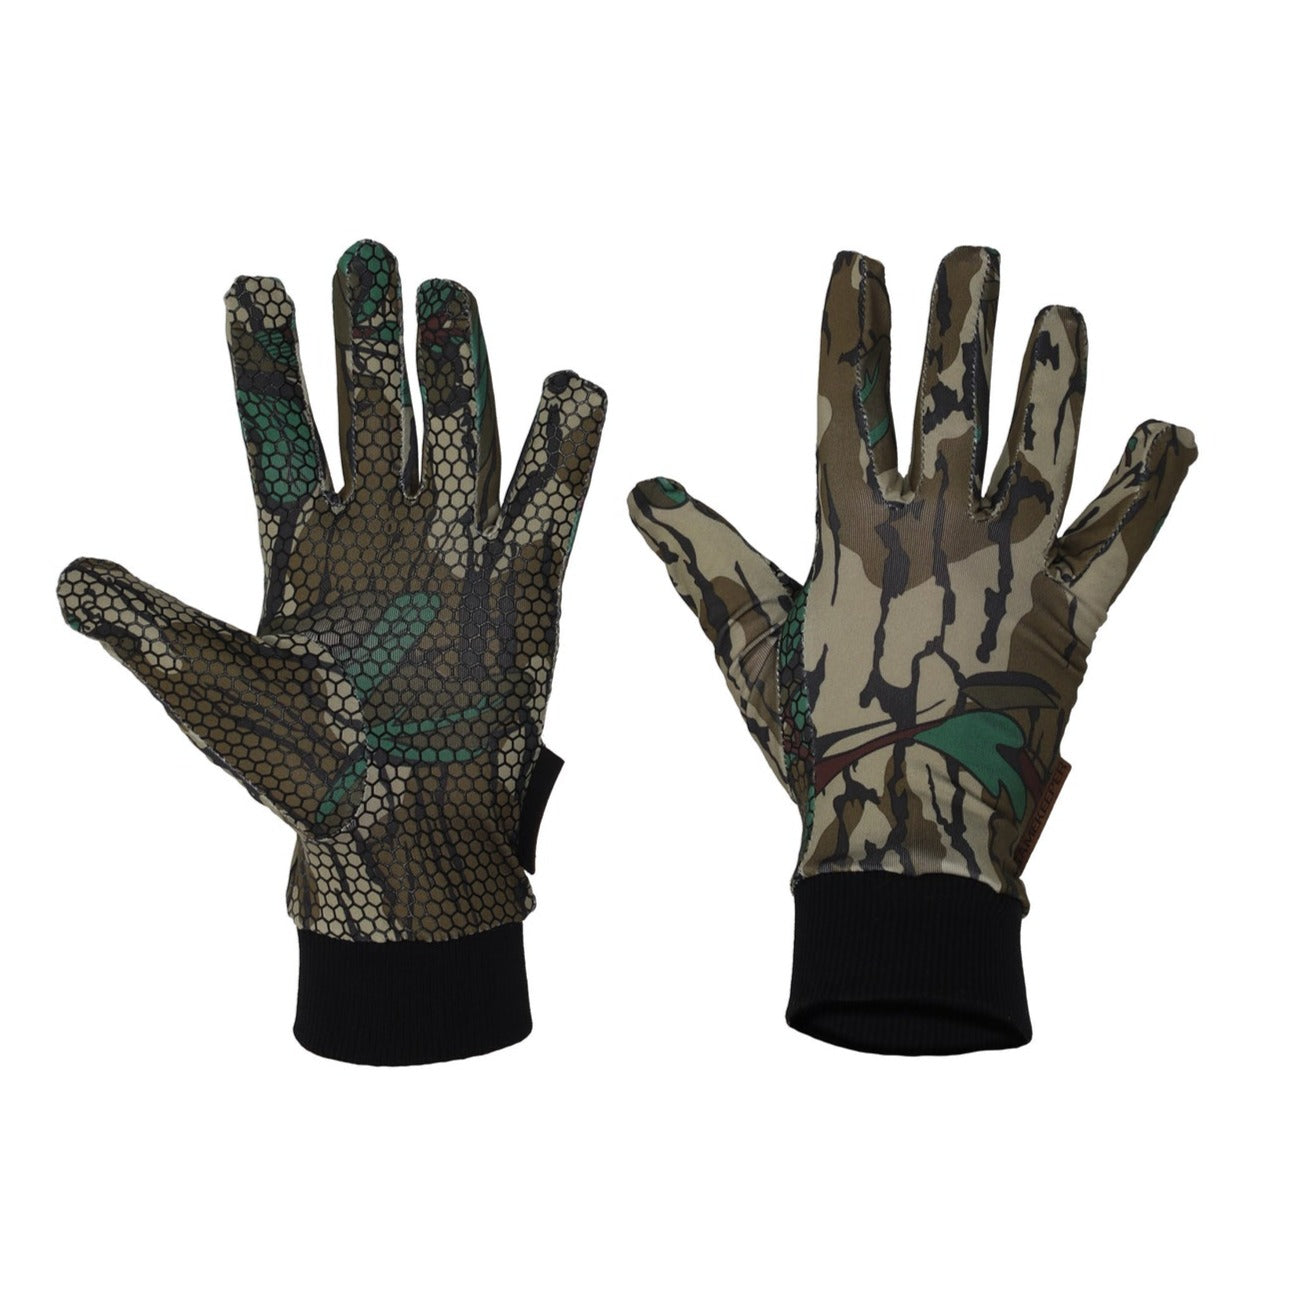 Gamekeeper DTB Ultra-Lite Gloves-Hunting/Outdoors-Original Greenleaf-ONE SIZE-Kevin's Fine Outdoor Gear & Apparel